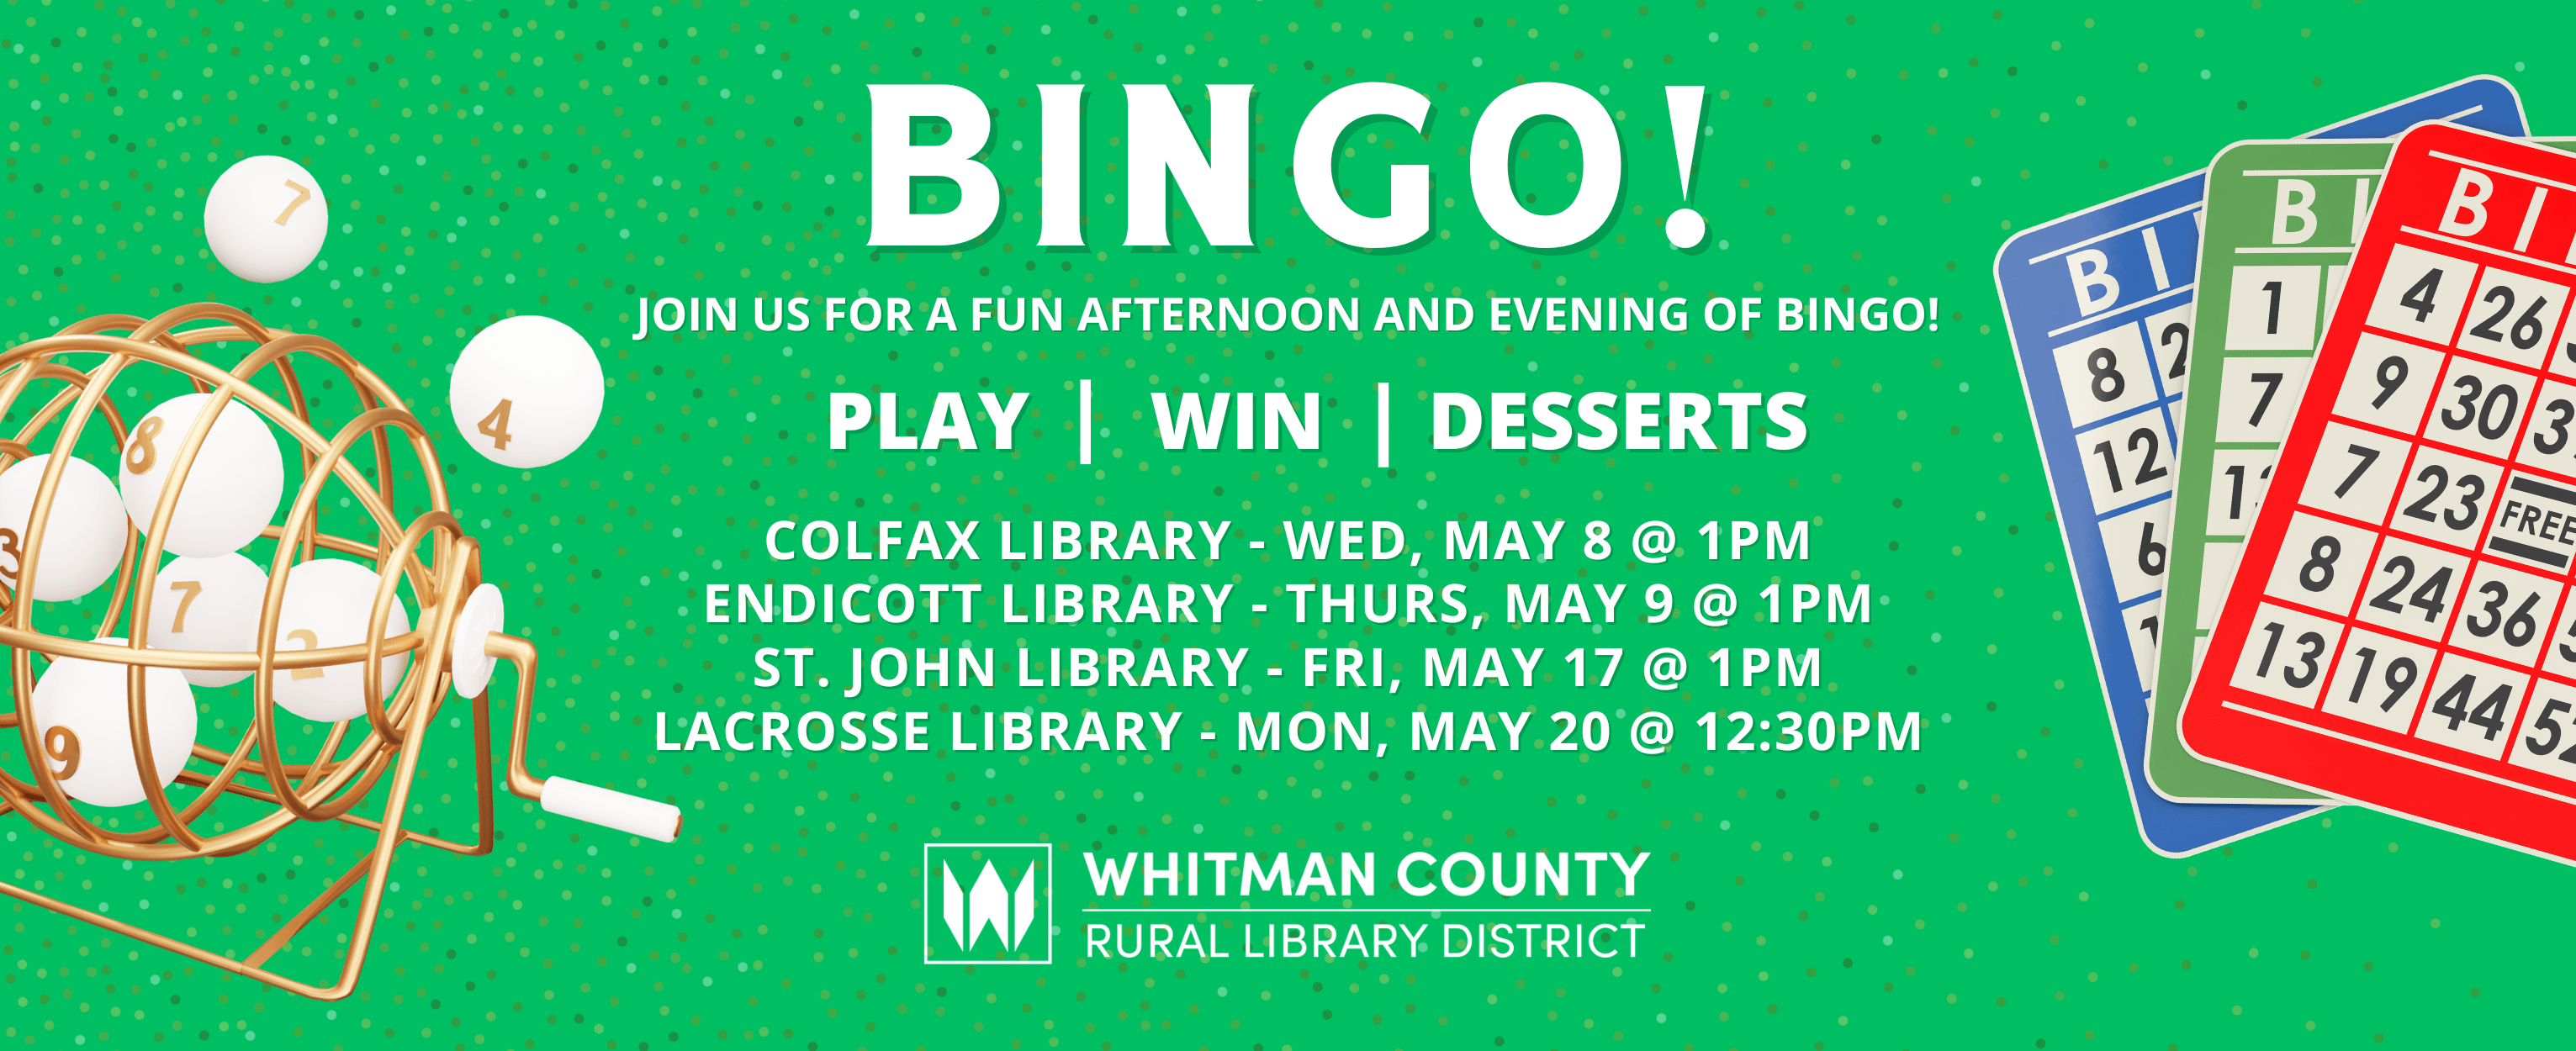 Don't miss all of the BINGO fun that will be happening across the county with WCL this month! Colfax, Endicott, St. John, and LaCrosse libraries are all offering programs. Click here for details.